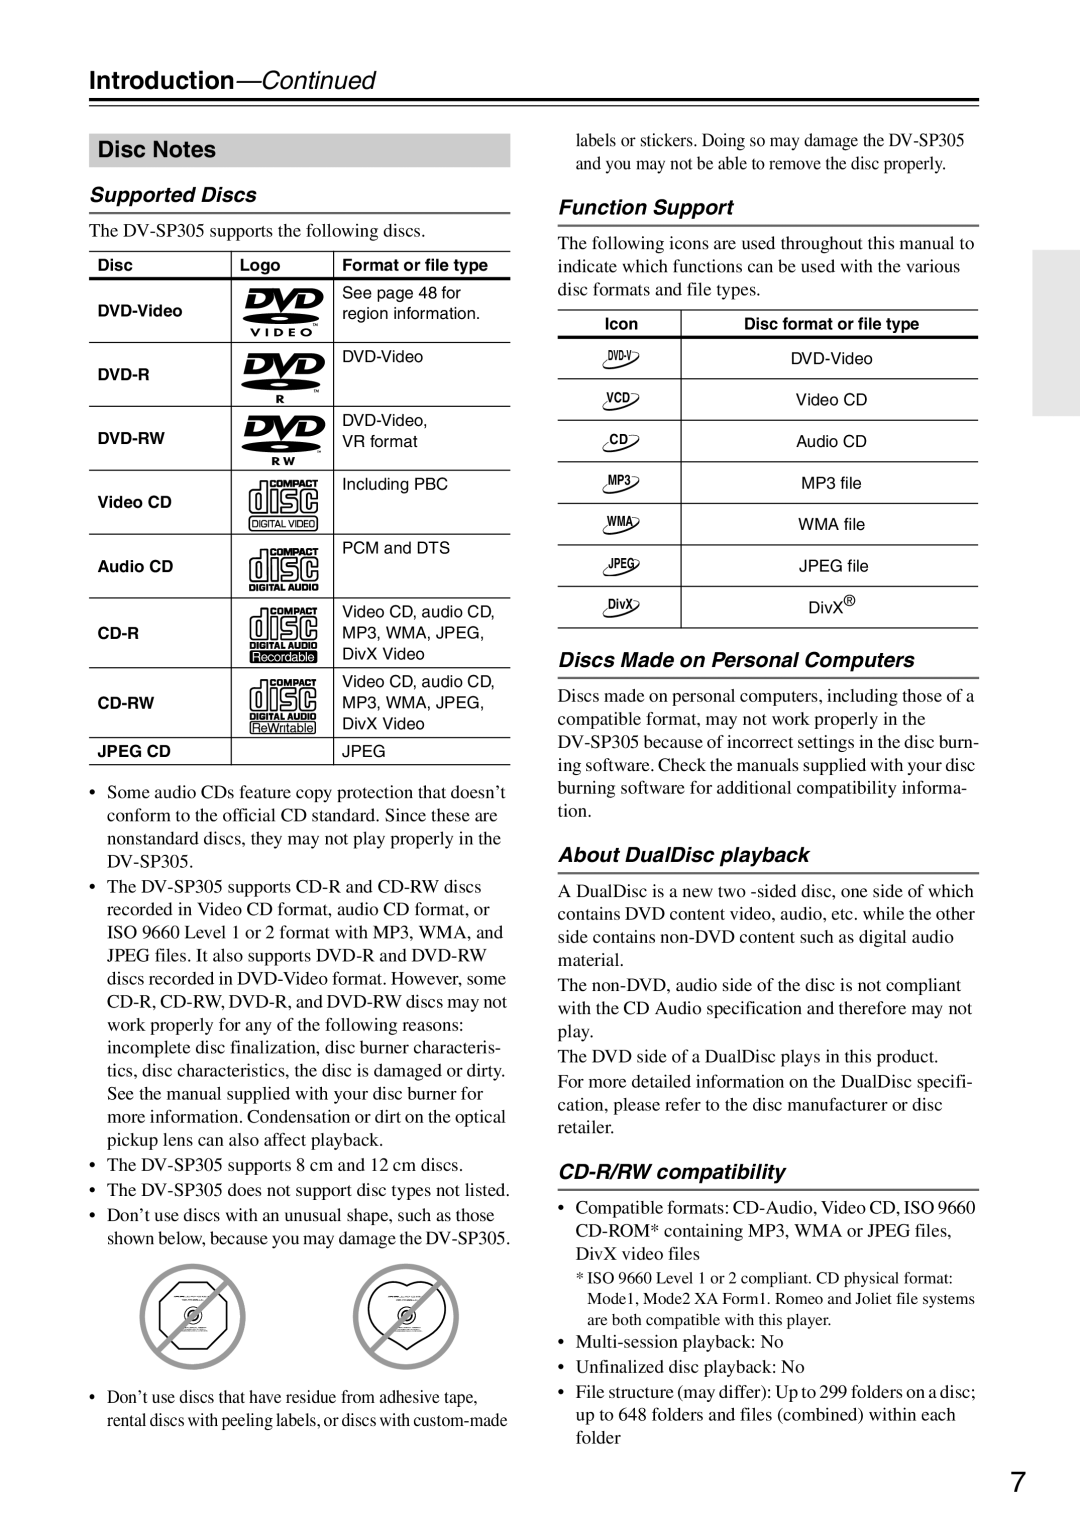 Onkyo DV-SP305 instruction manual Introduction, Disc Notes 